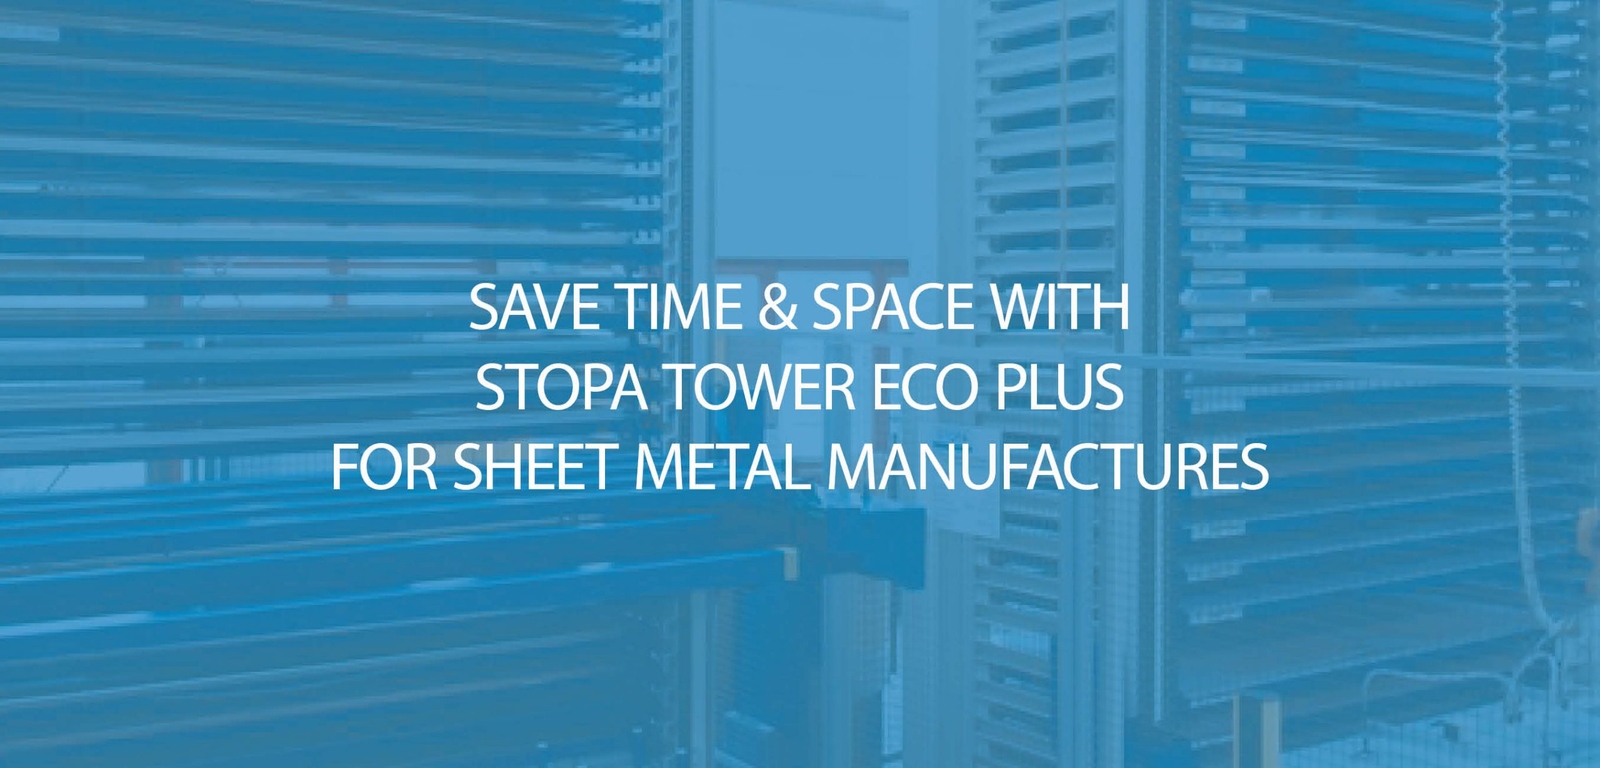 STOPA TOWER ECO Plus – Traditional racking vs STOPA Vertical Automated Storage